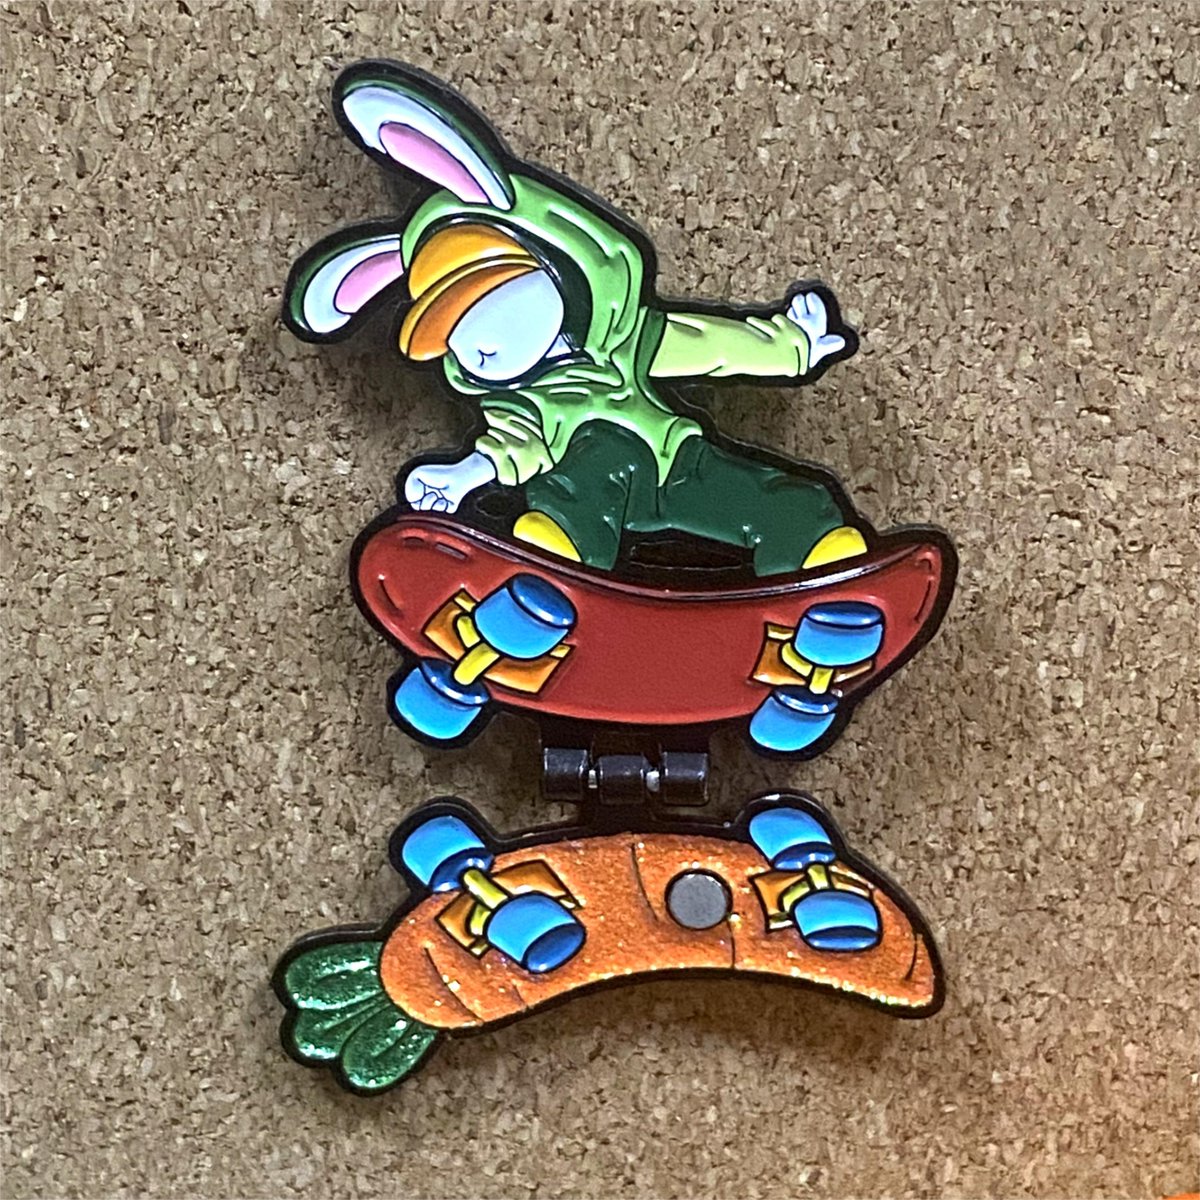 🐰Bunny's Carrot Skateboard! 
🥕The second image has a surprise. Carrots that can be opened. It's so cute!

#custom #custompin #custompins #customlapelpin #customenamelpin #softenamelpins #bunny #carrots #gsjjpins #gsjj